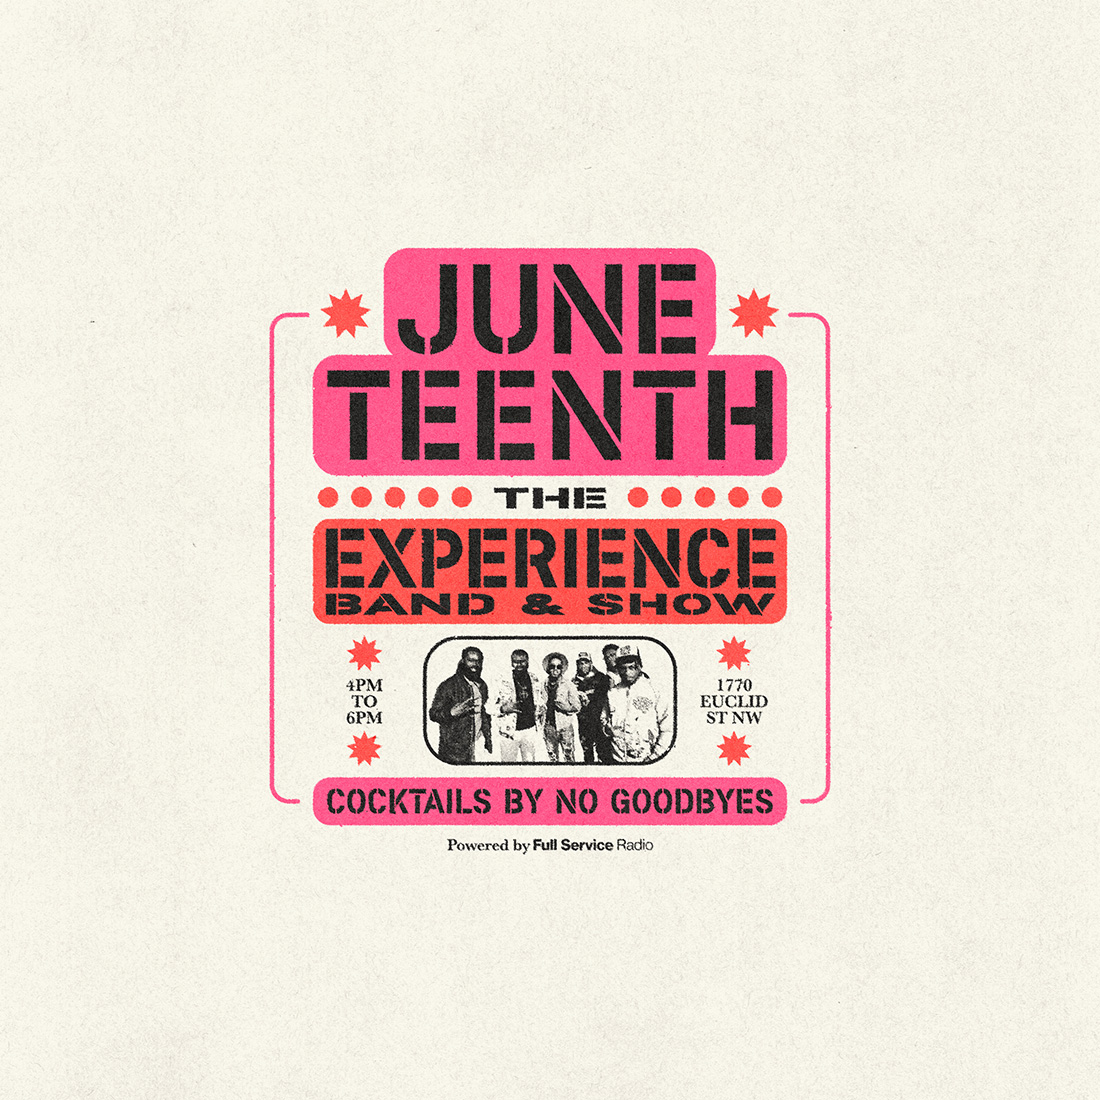 The brochure depicts "JUNE TEENTH" with an image of people and informative text.